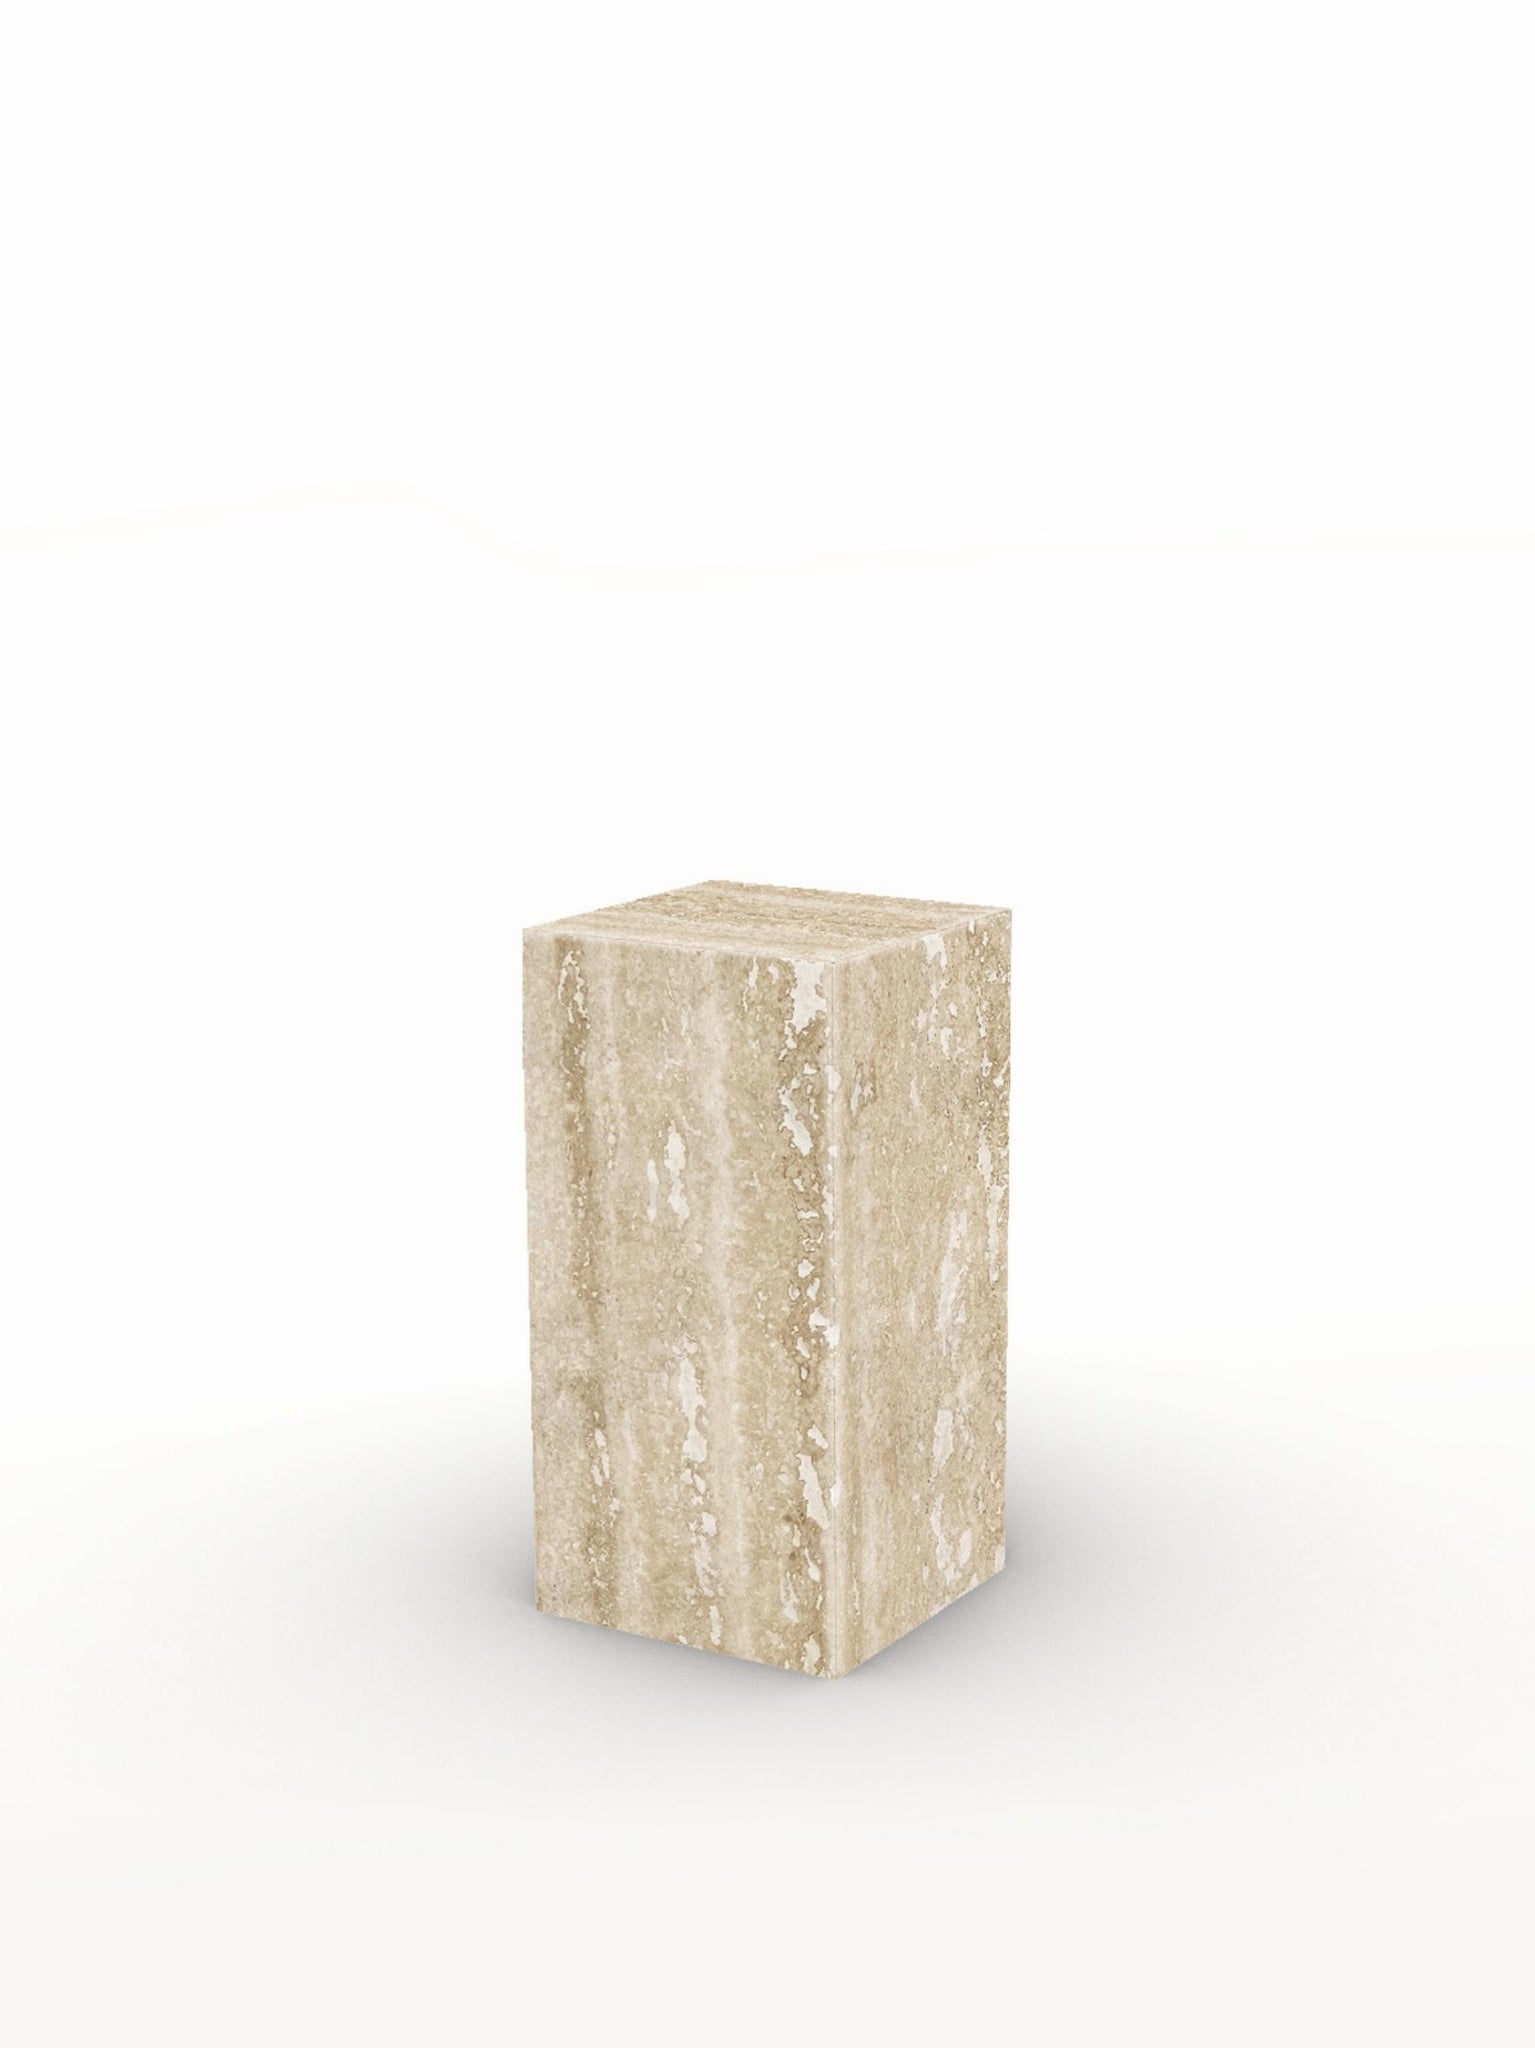 [Made-to-Order] FORTE Plinth – no. 60